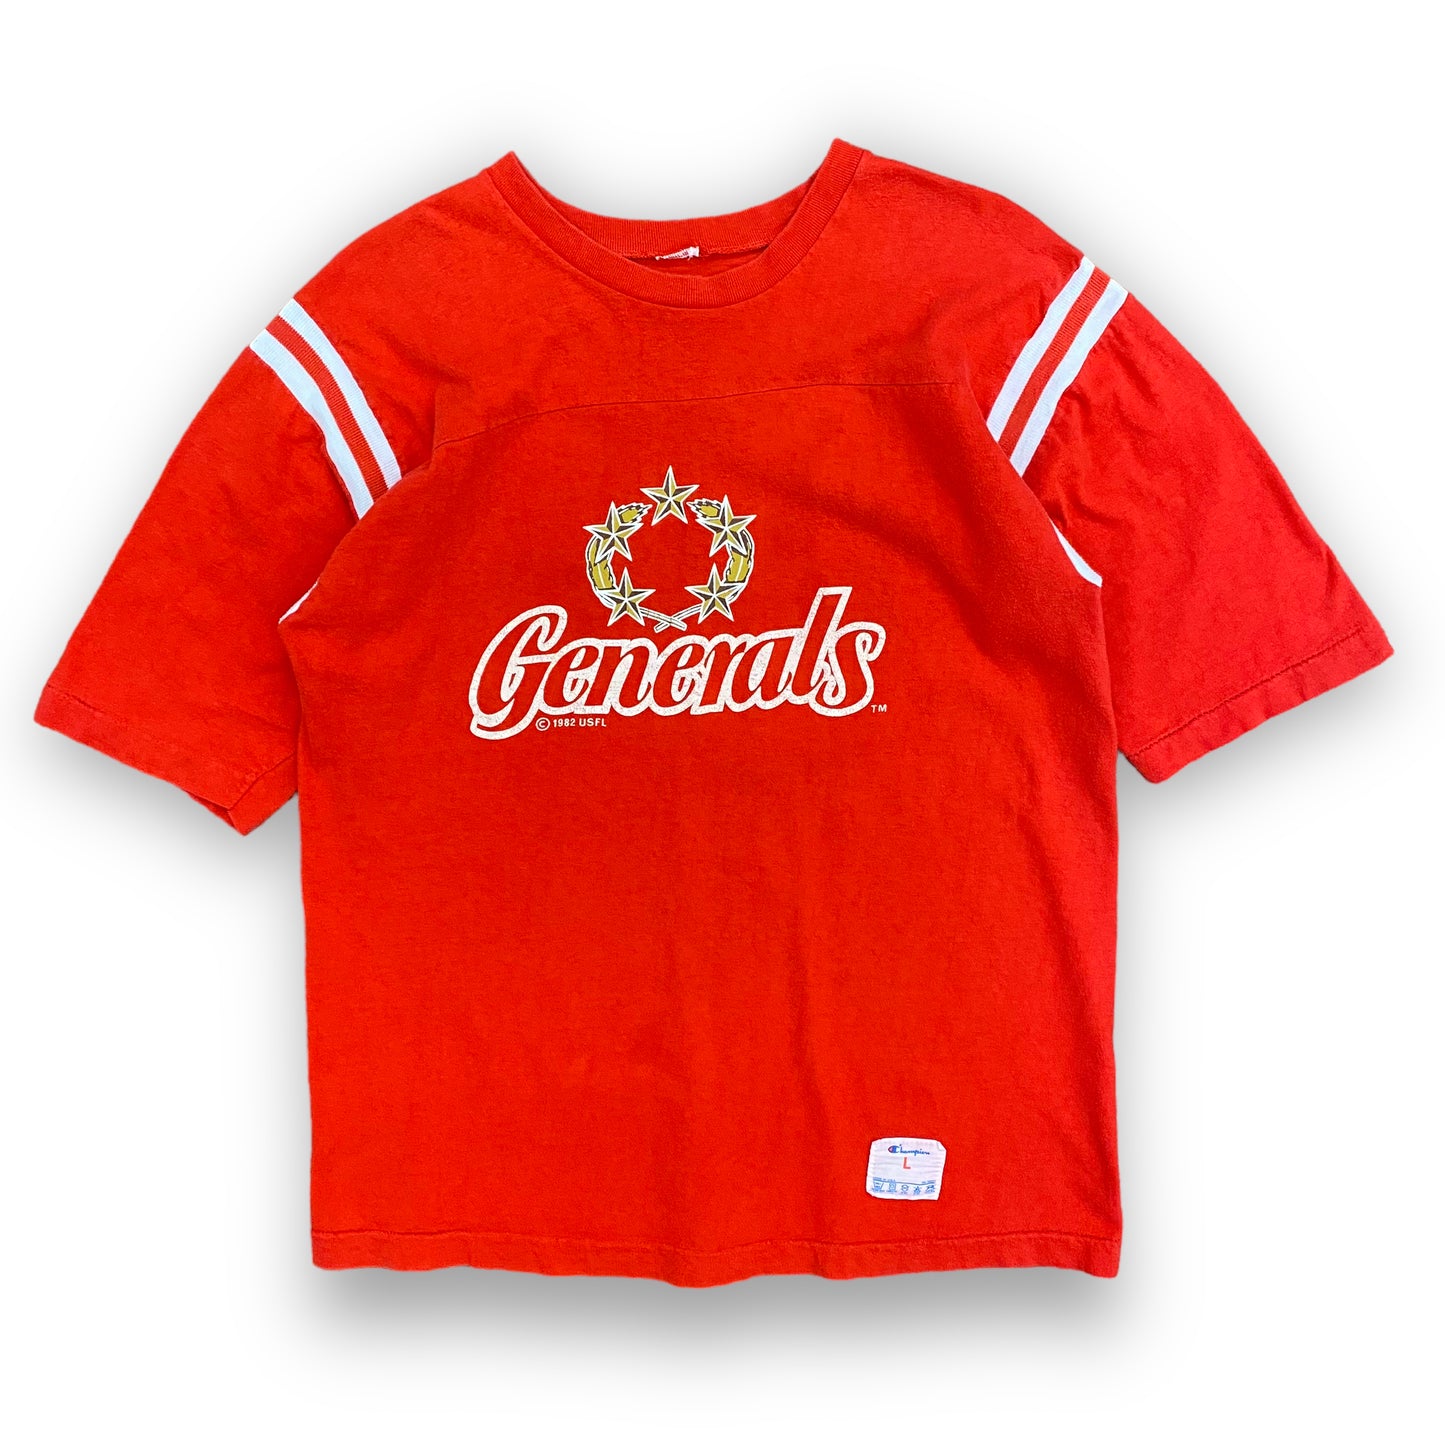 1980s Champion USFL New Jersey Generals Football Tee - Size Large